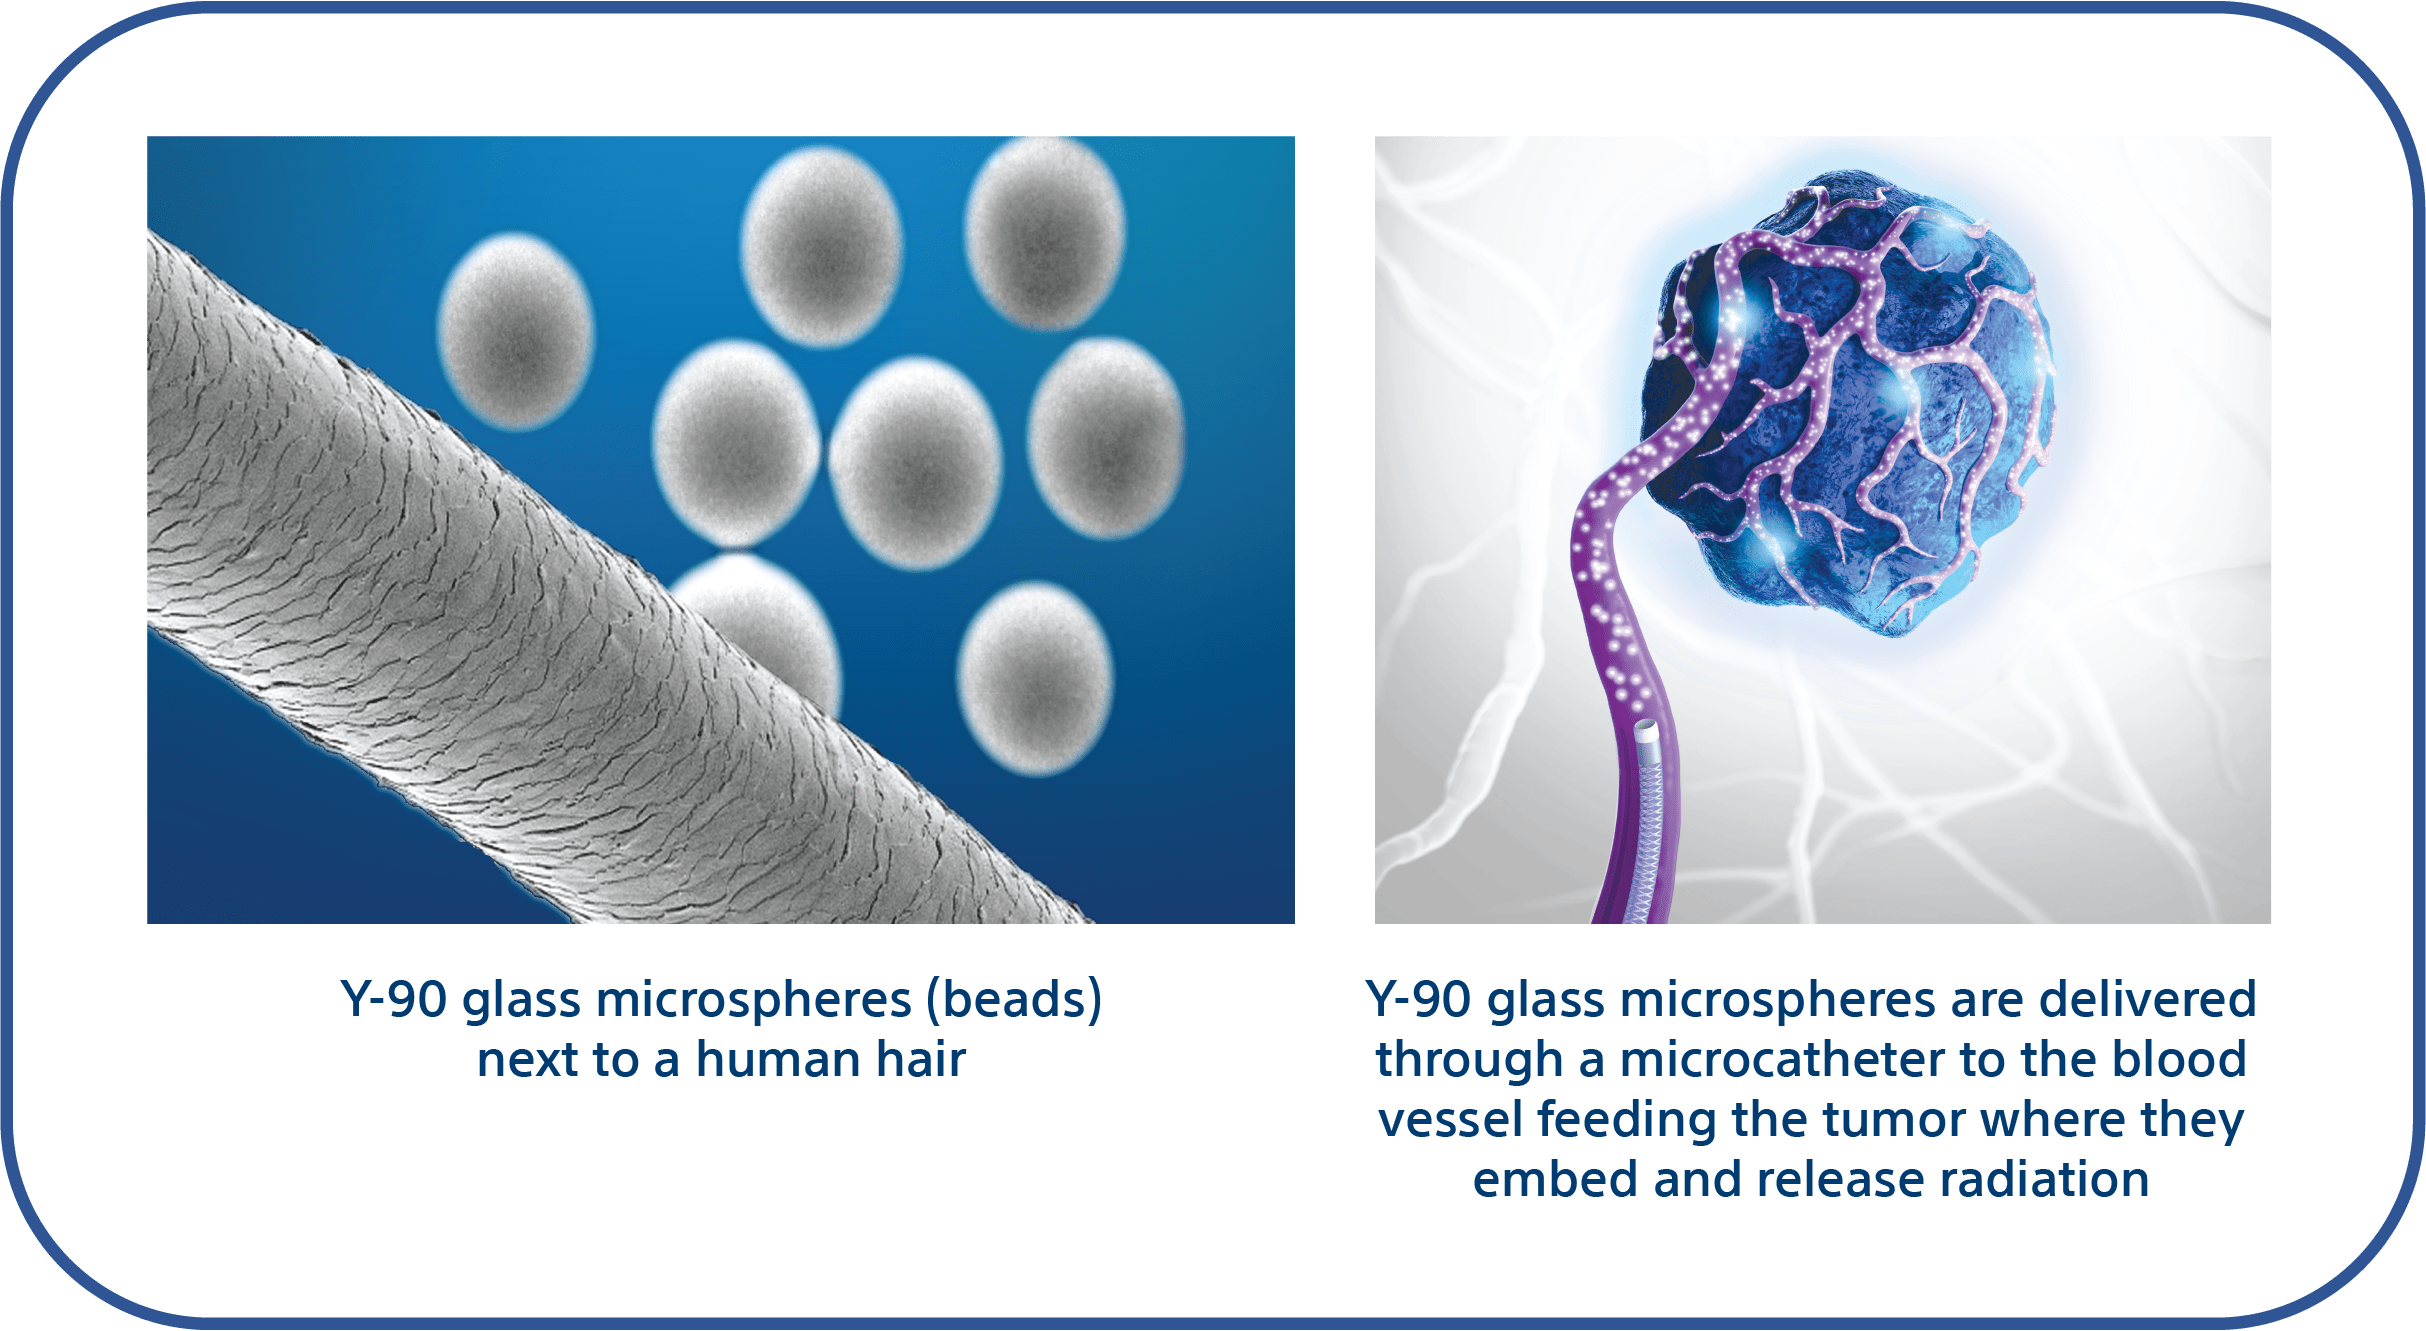 Image 1: Y-90 glass microspheres (beads) next to human hair. 
Image 2: Y-90 glass microspheres are delivered through a microcatheter to the vessel feeding the tumor where they embed and release radiation